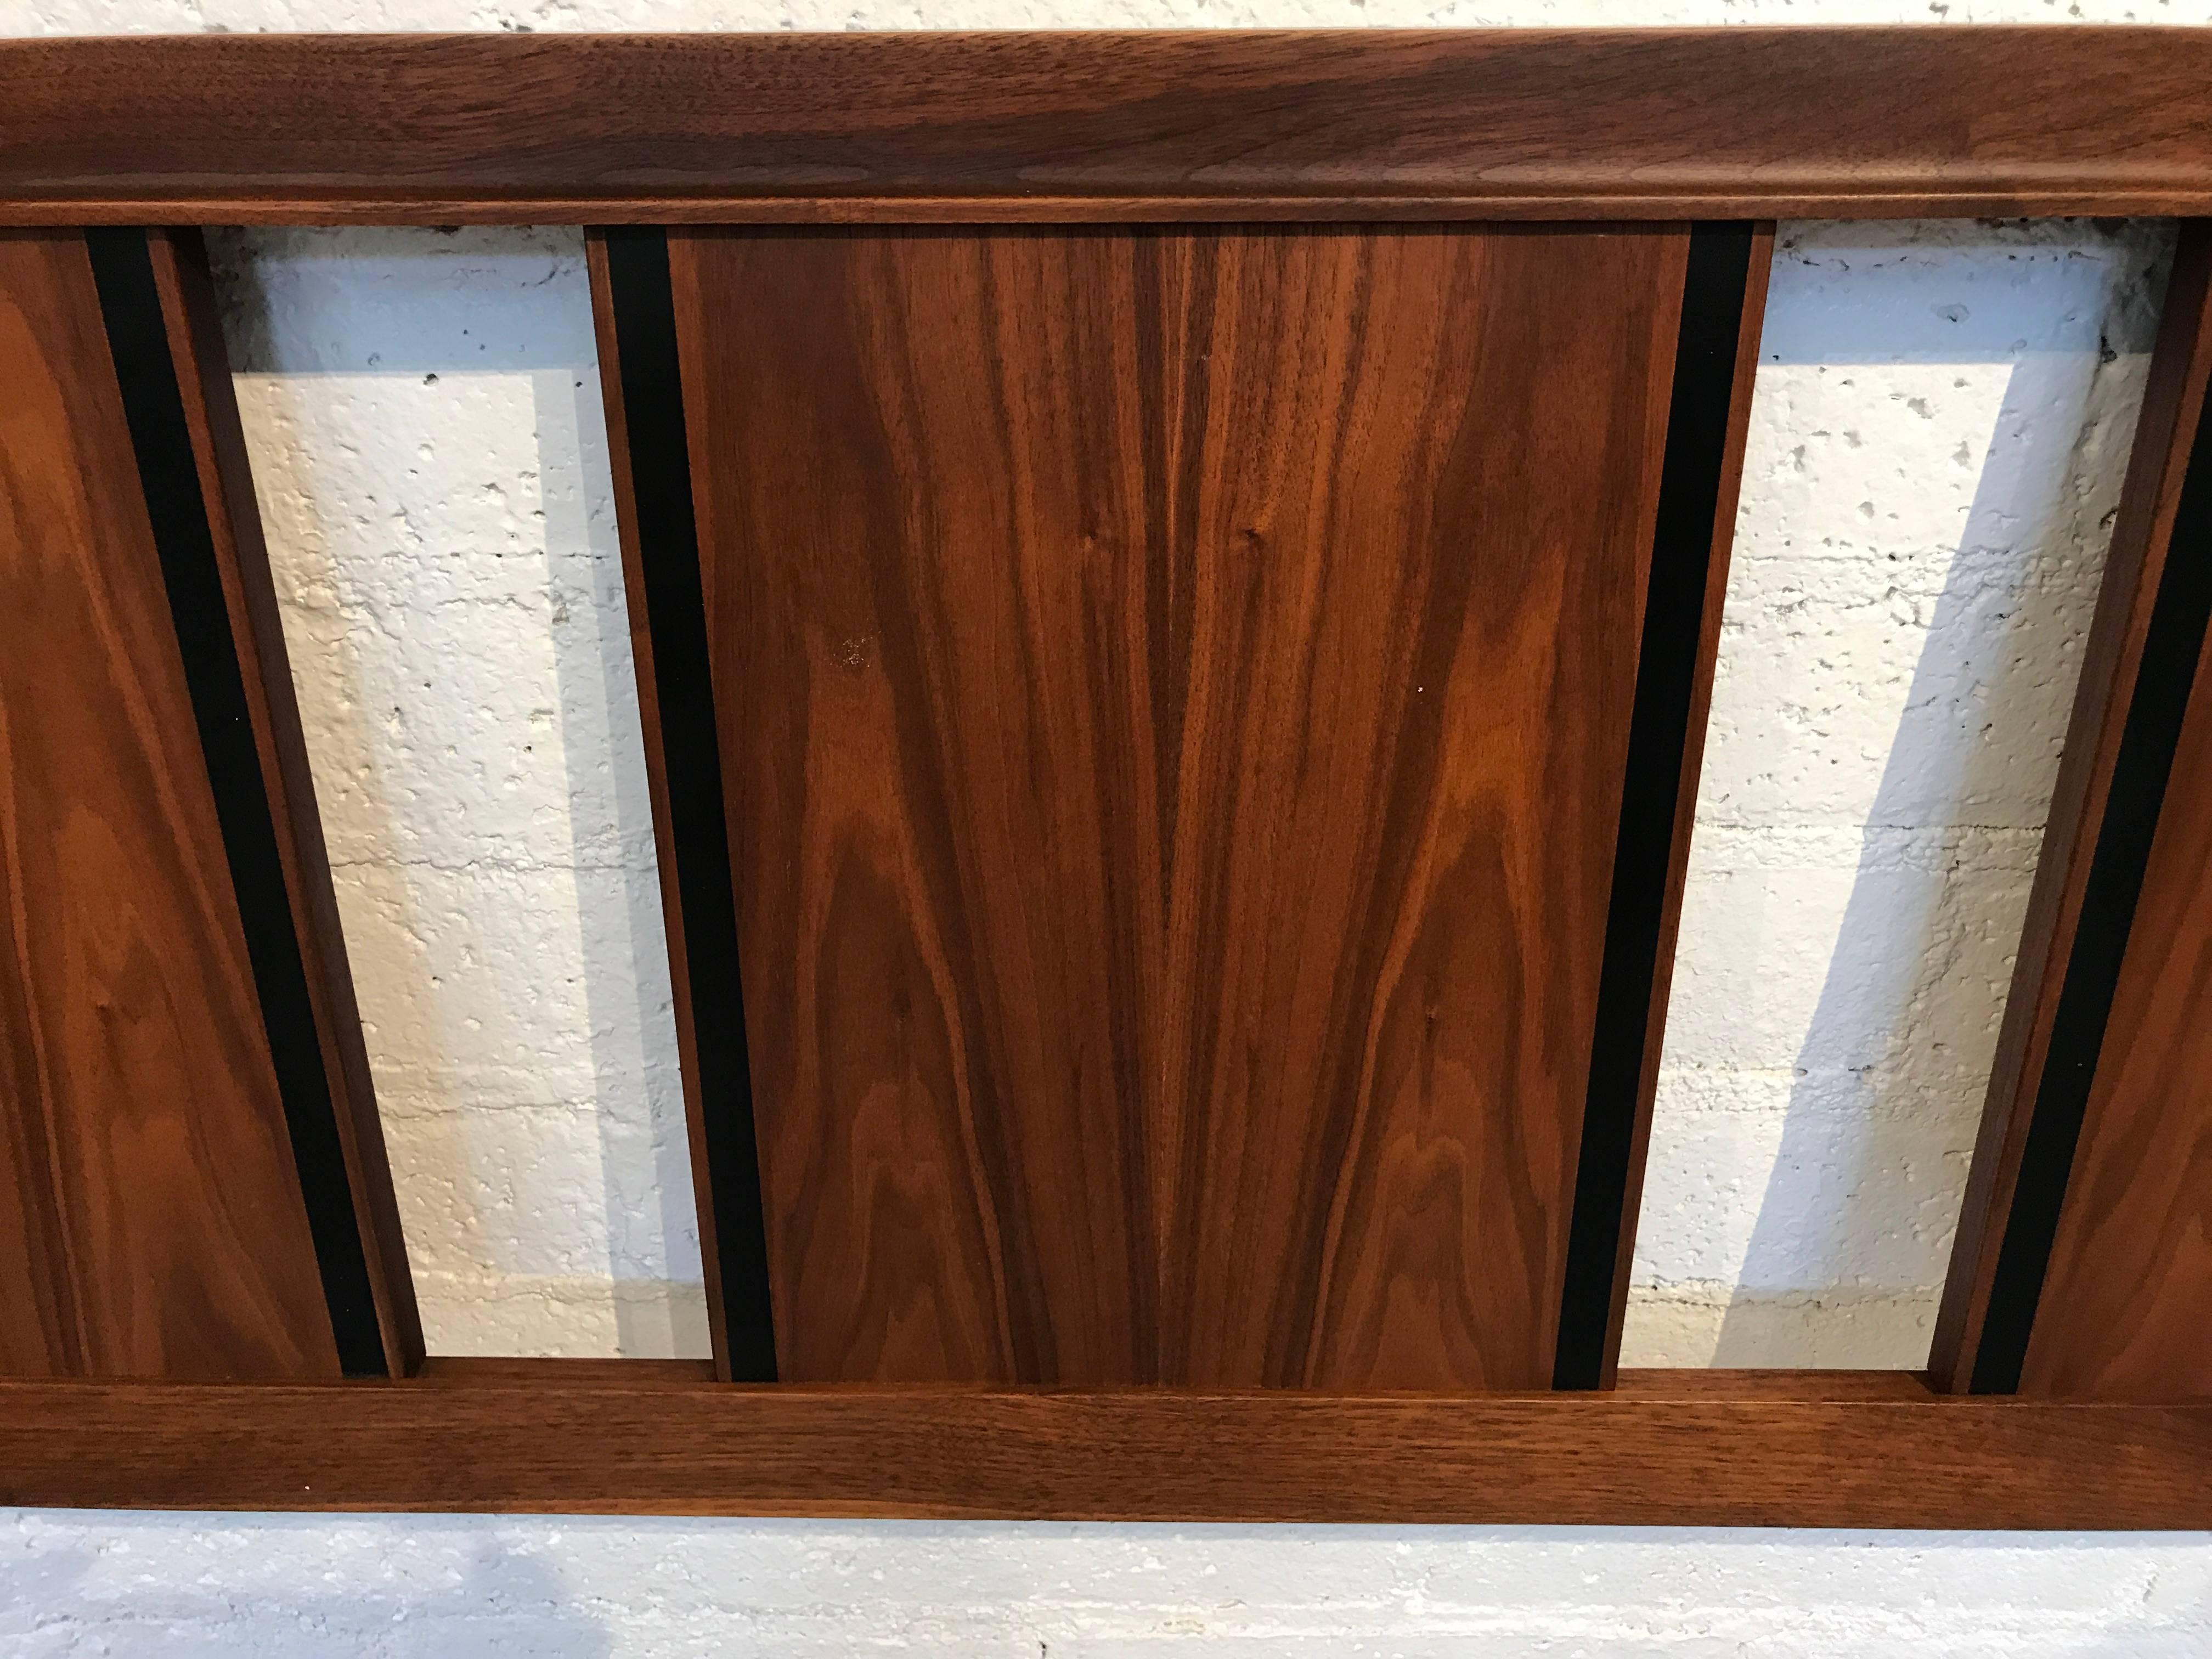 Out of a nice walnut bedroom set is this Dillingham king-size headboard. No bed frame just the walnut headboard. Age appropriate wear with scuffing and minor marks, abrasions and surface scratches.